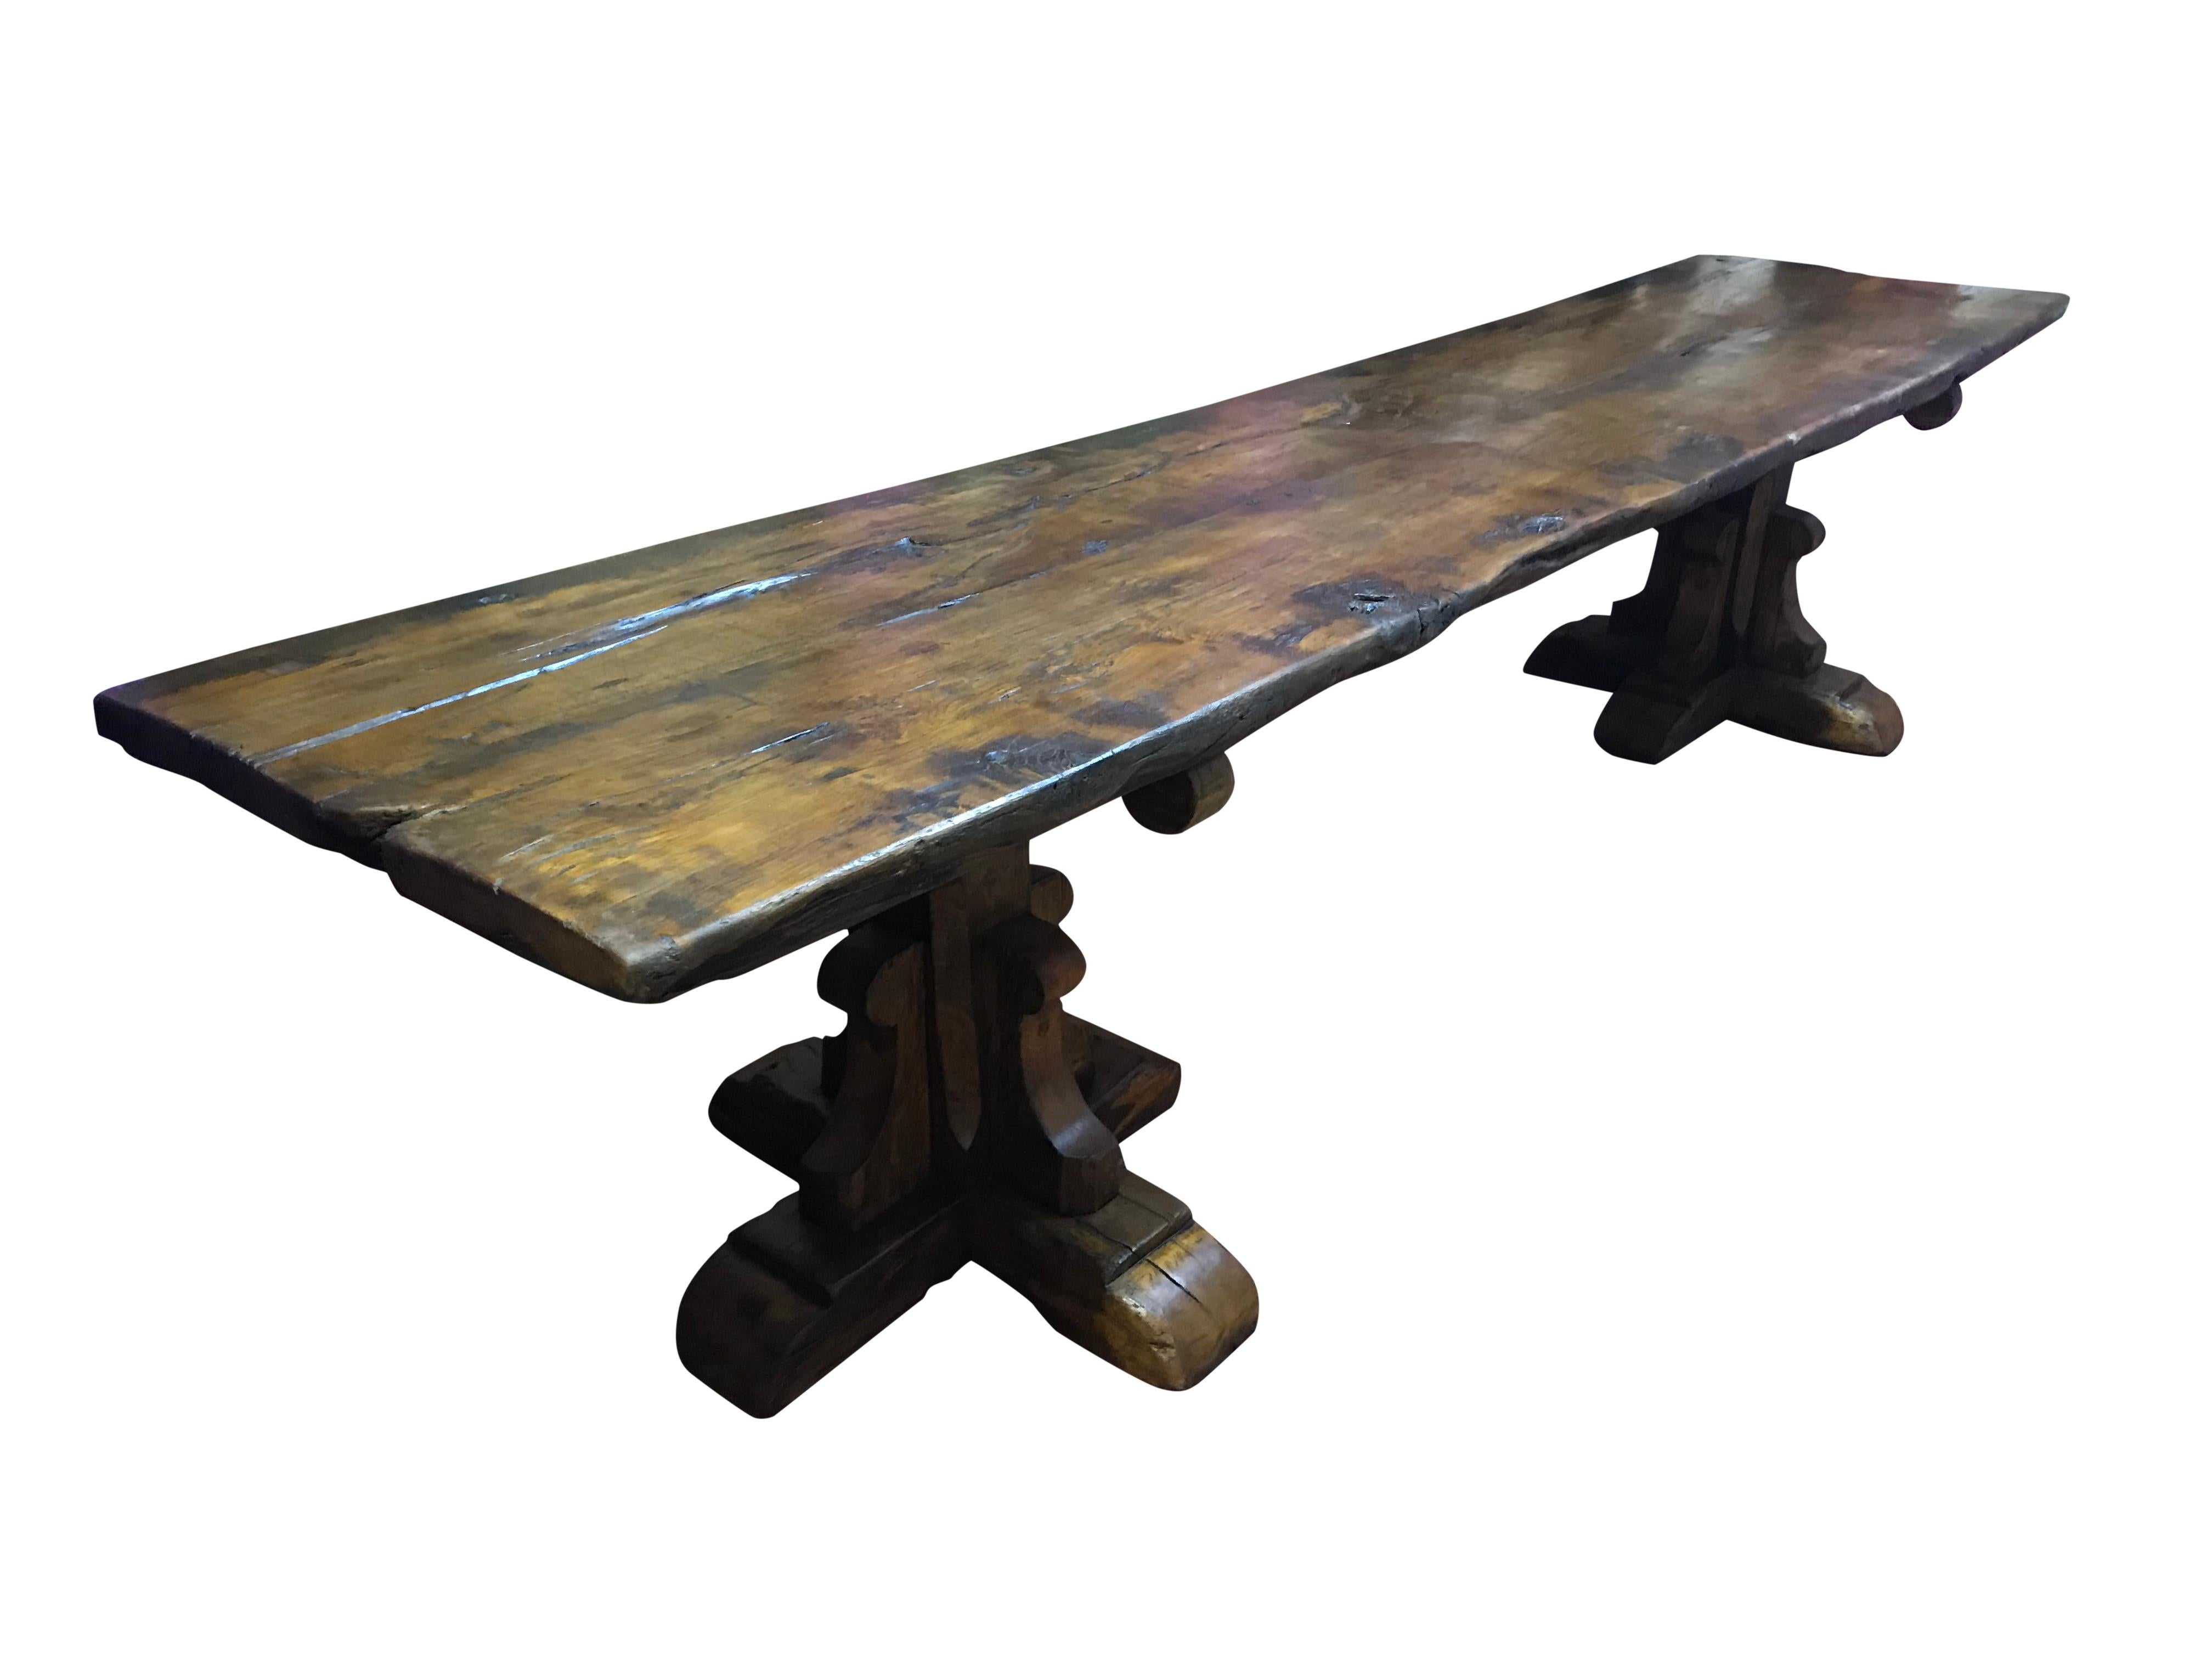 A very large medieval style golden oak rustic refectory table with a double plank top, supported by two square 'X' frame pedestals.